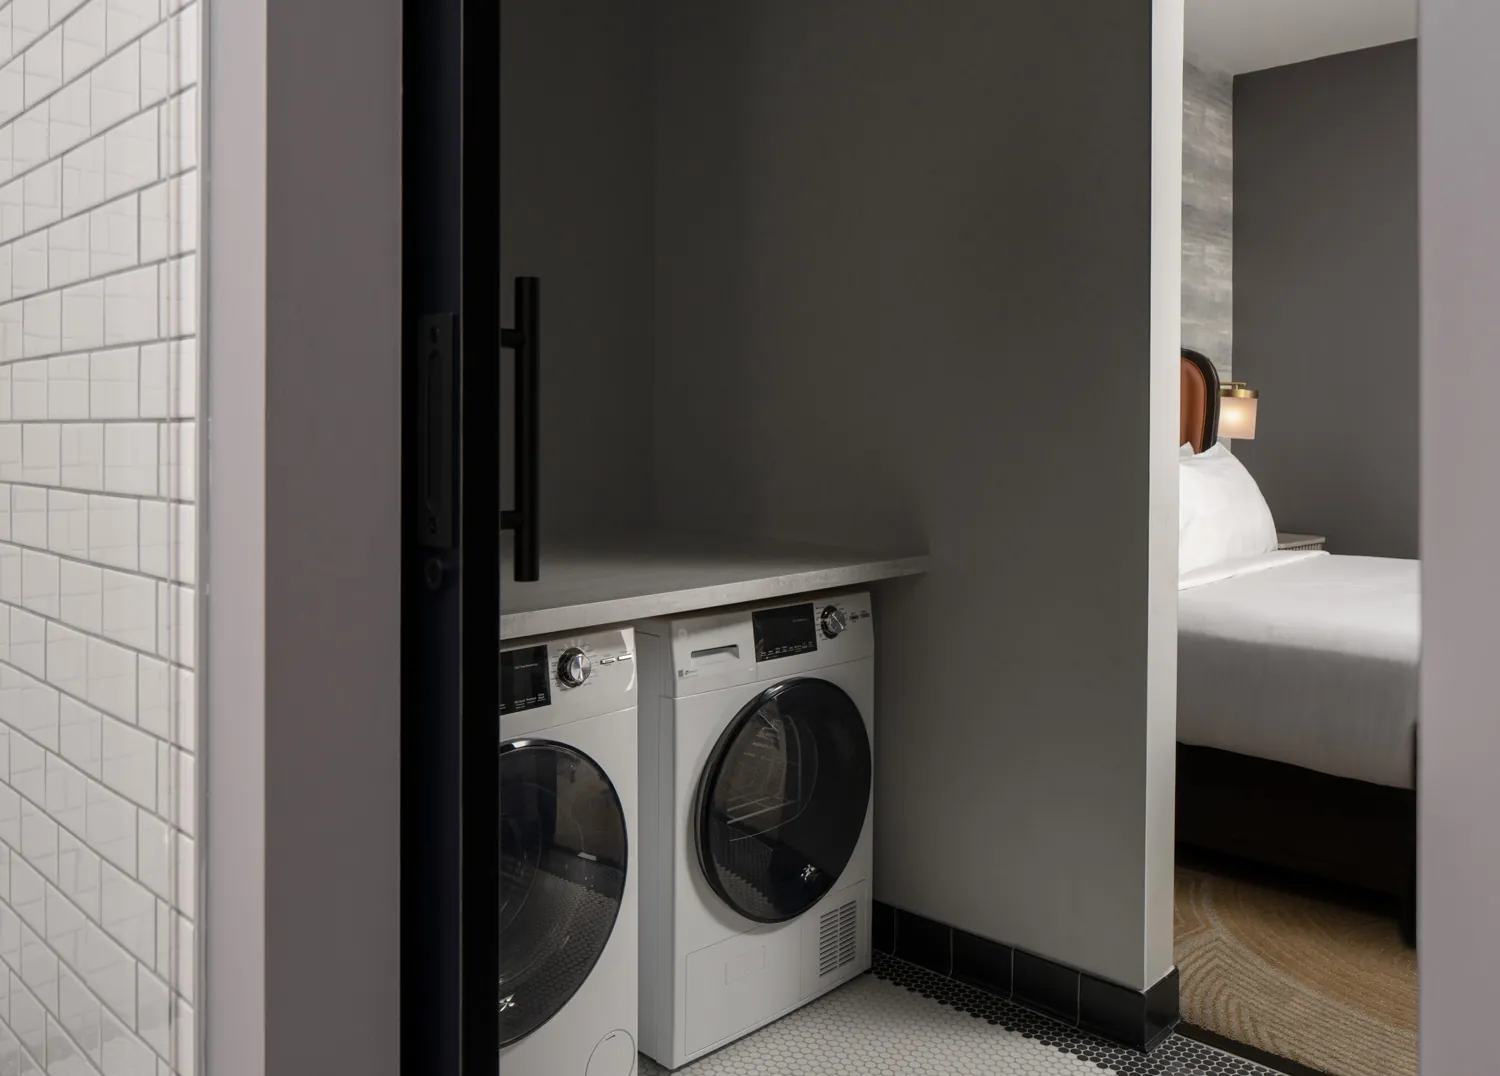 A washer and dryer in a room